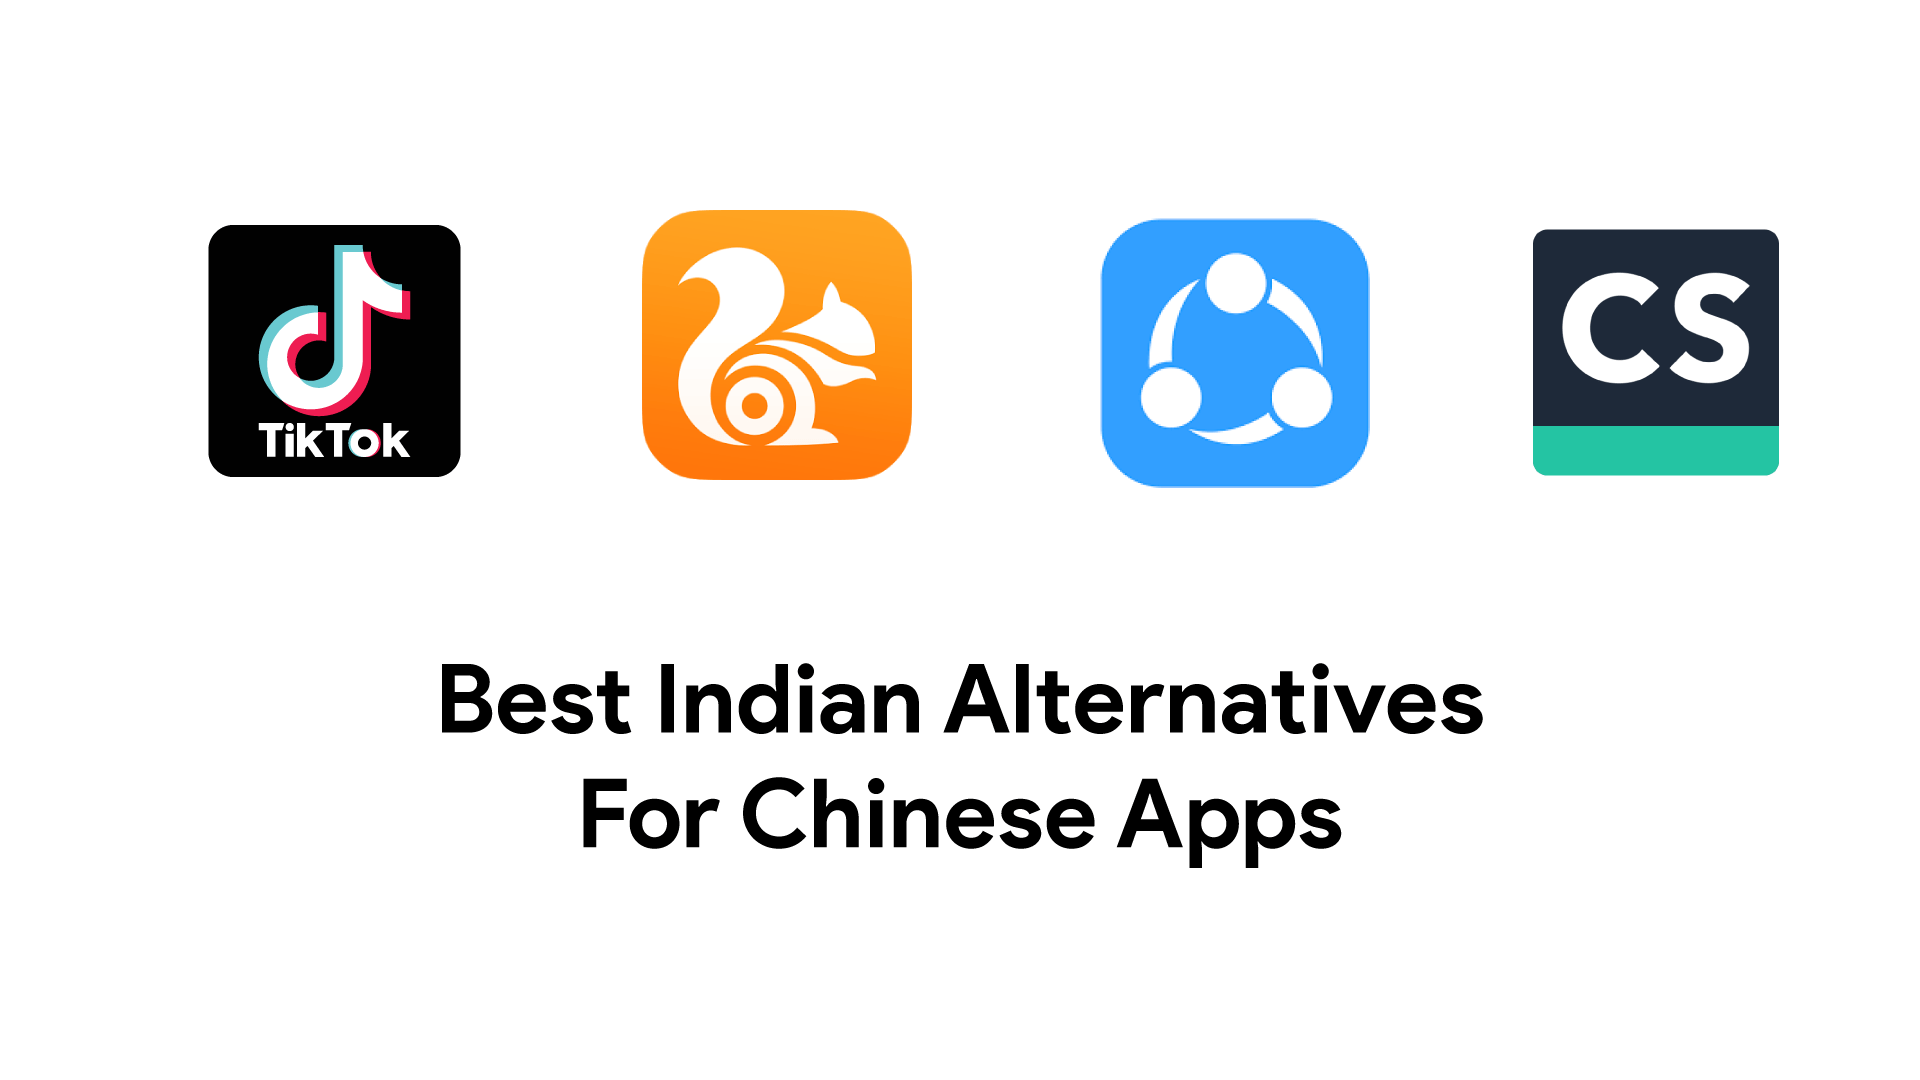 Alternatives To Banned Chinese Apps In India